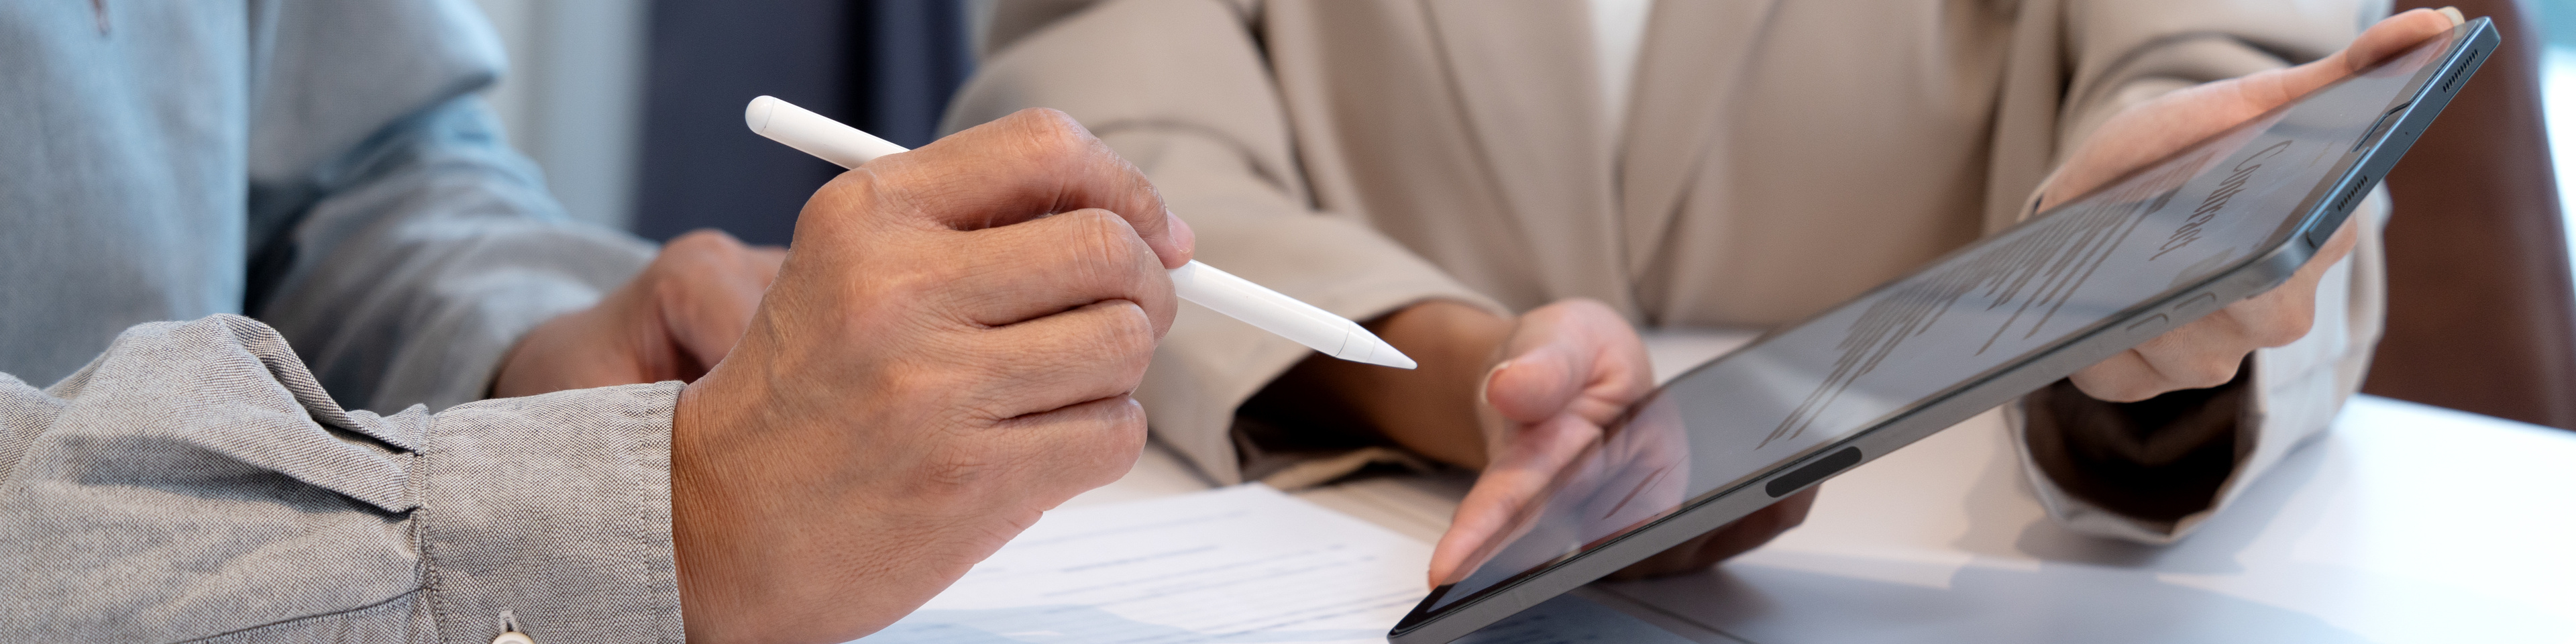 Woman handing an electronic document on a tablet for a businessman to sign